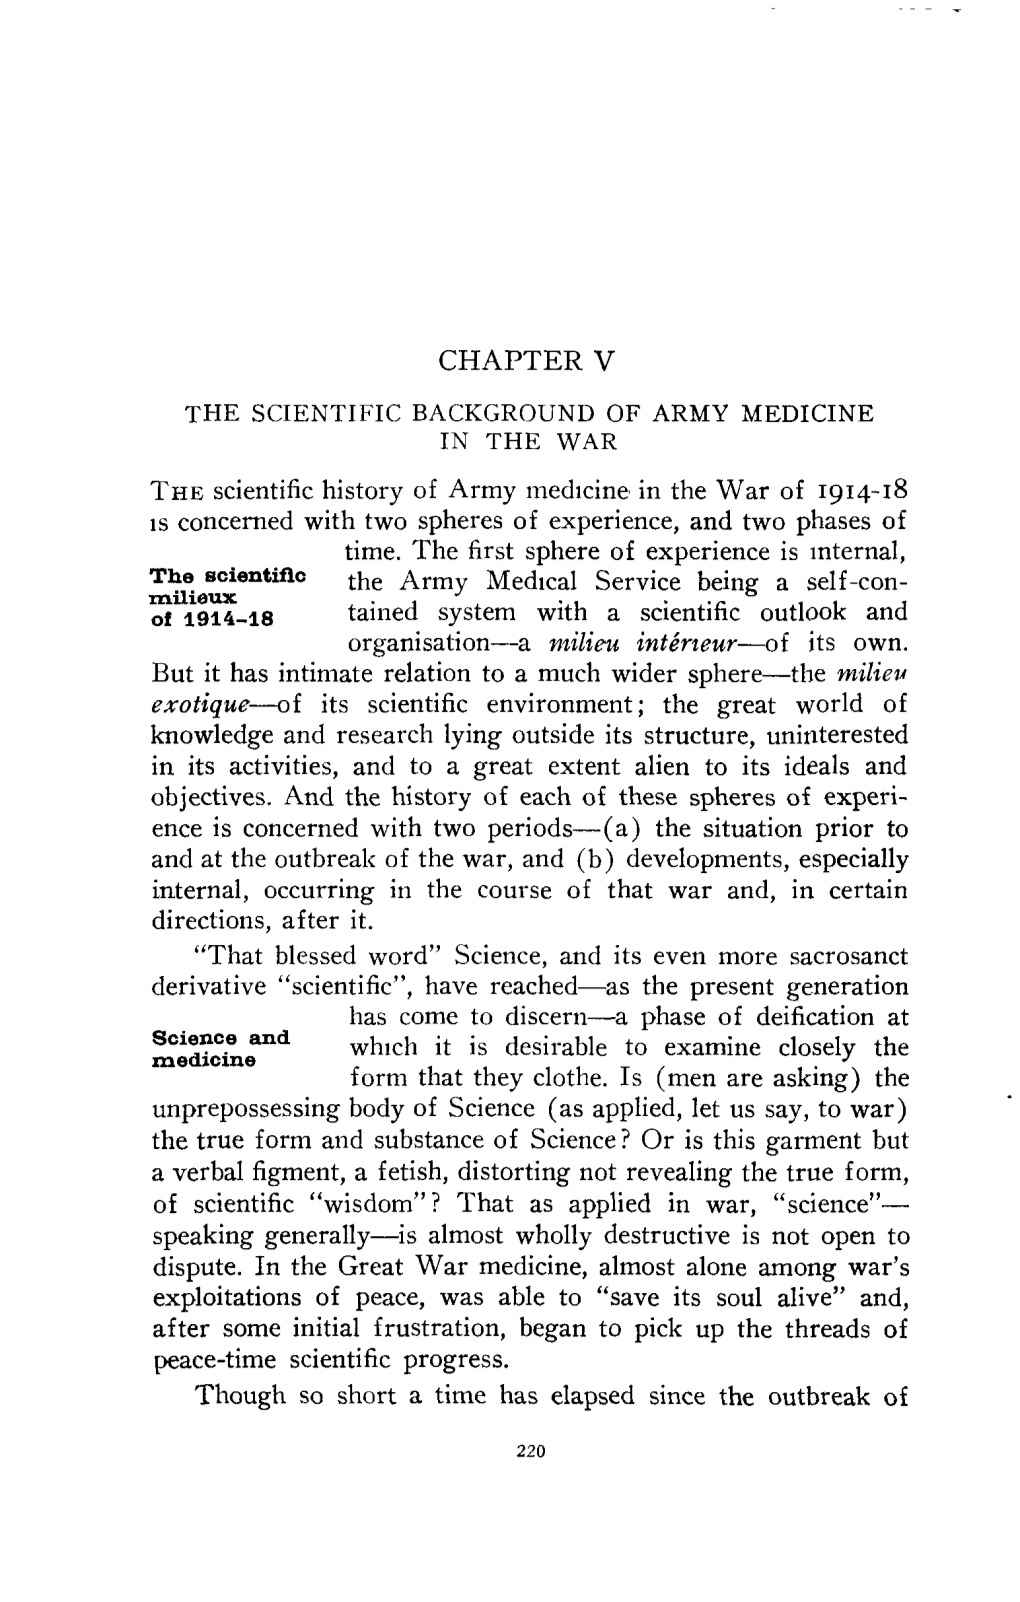 The Scientific Background of Army Medicine in The